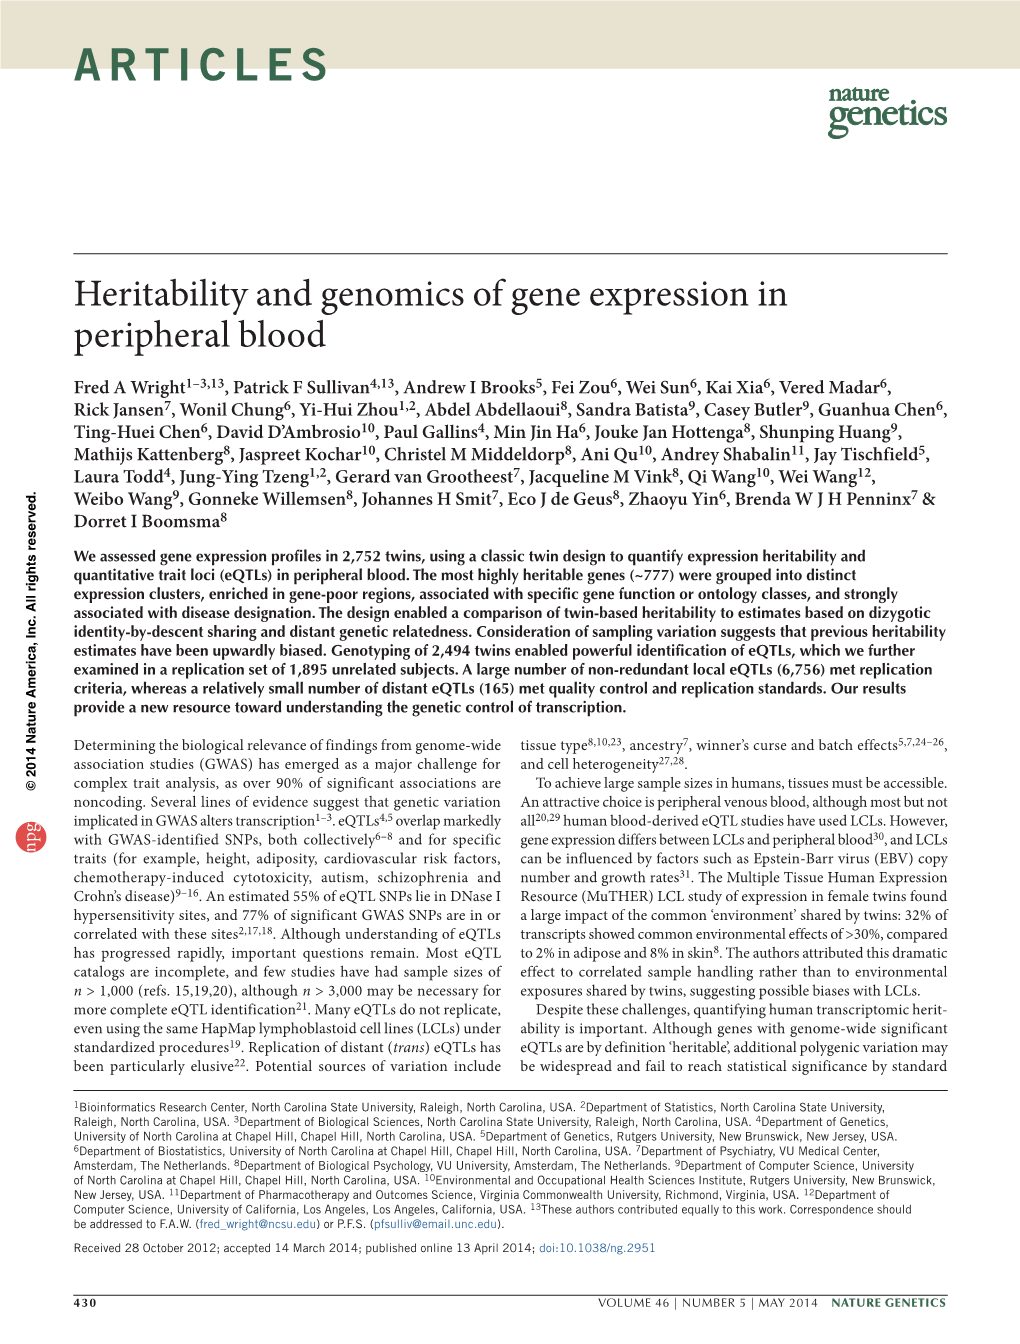 Heritability and Genomics of Gene Expression in Peripheral Blood